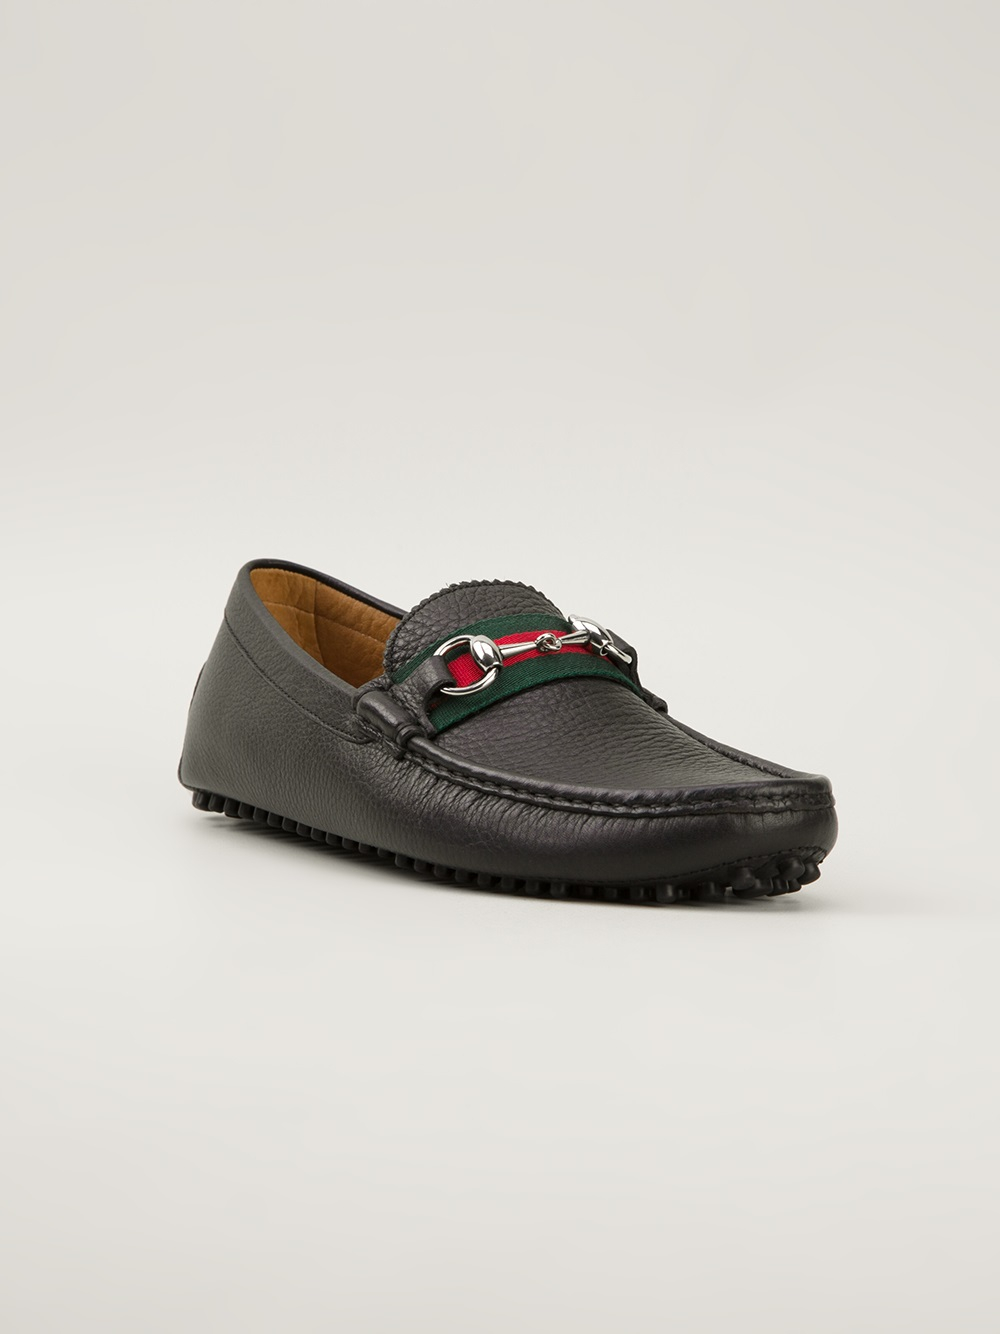 Gucci Leather Classic Driving Shoes in Black for Men - Lyst